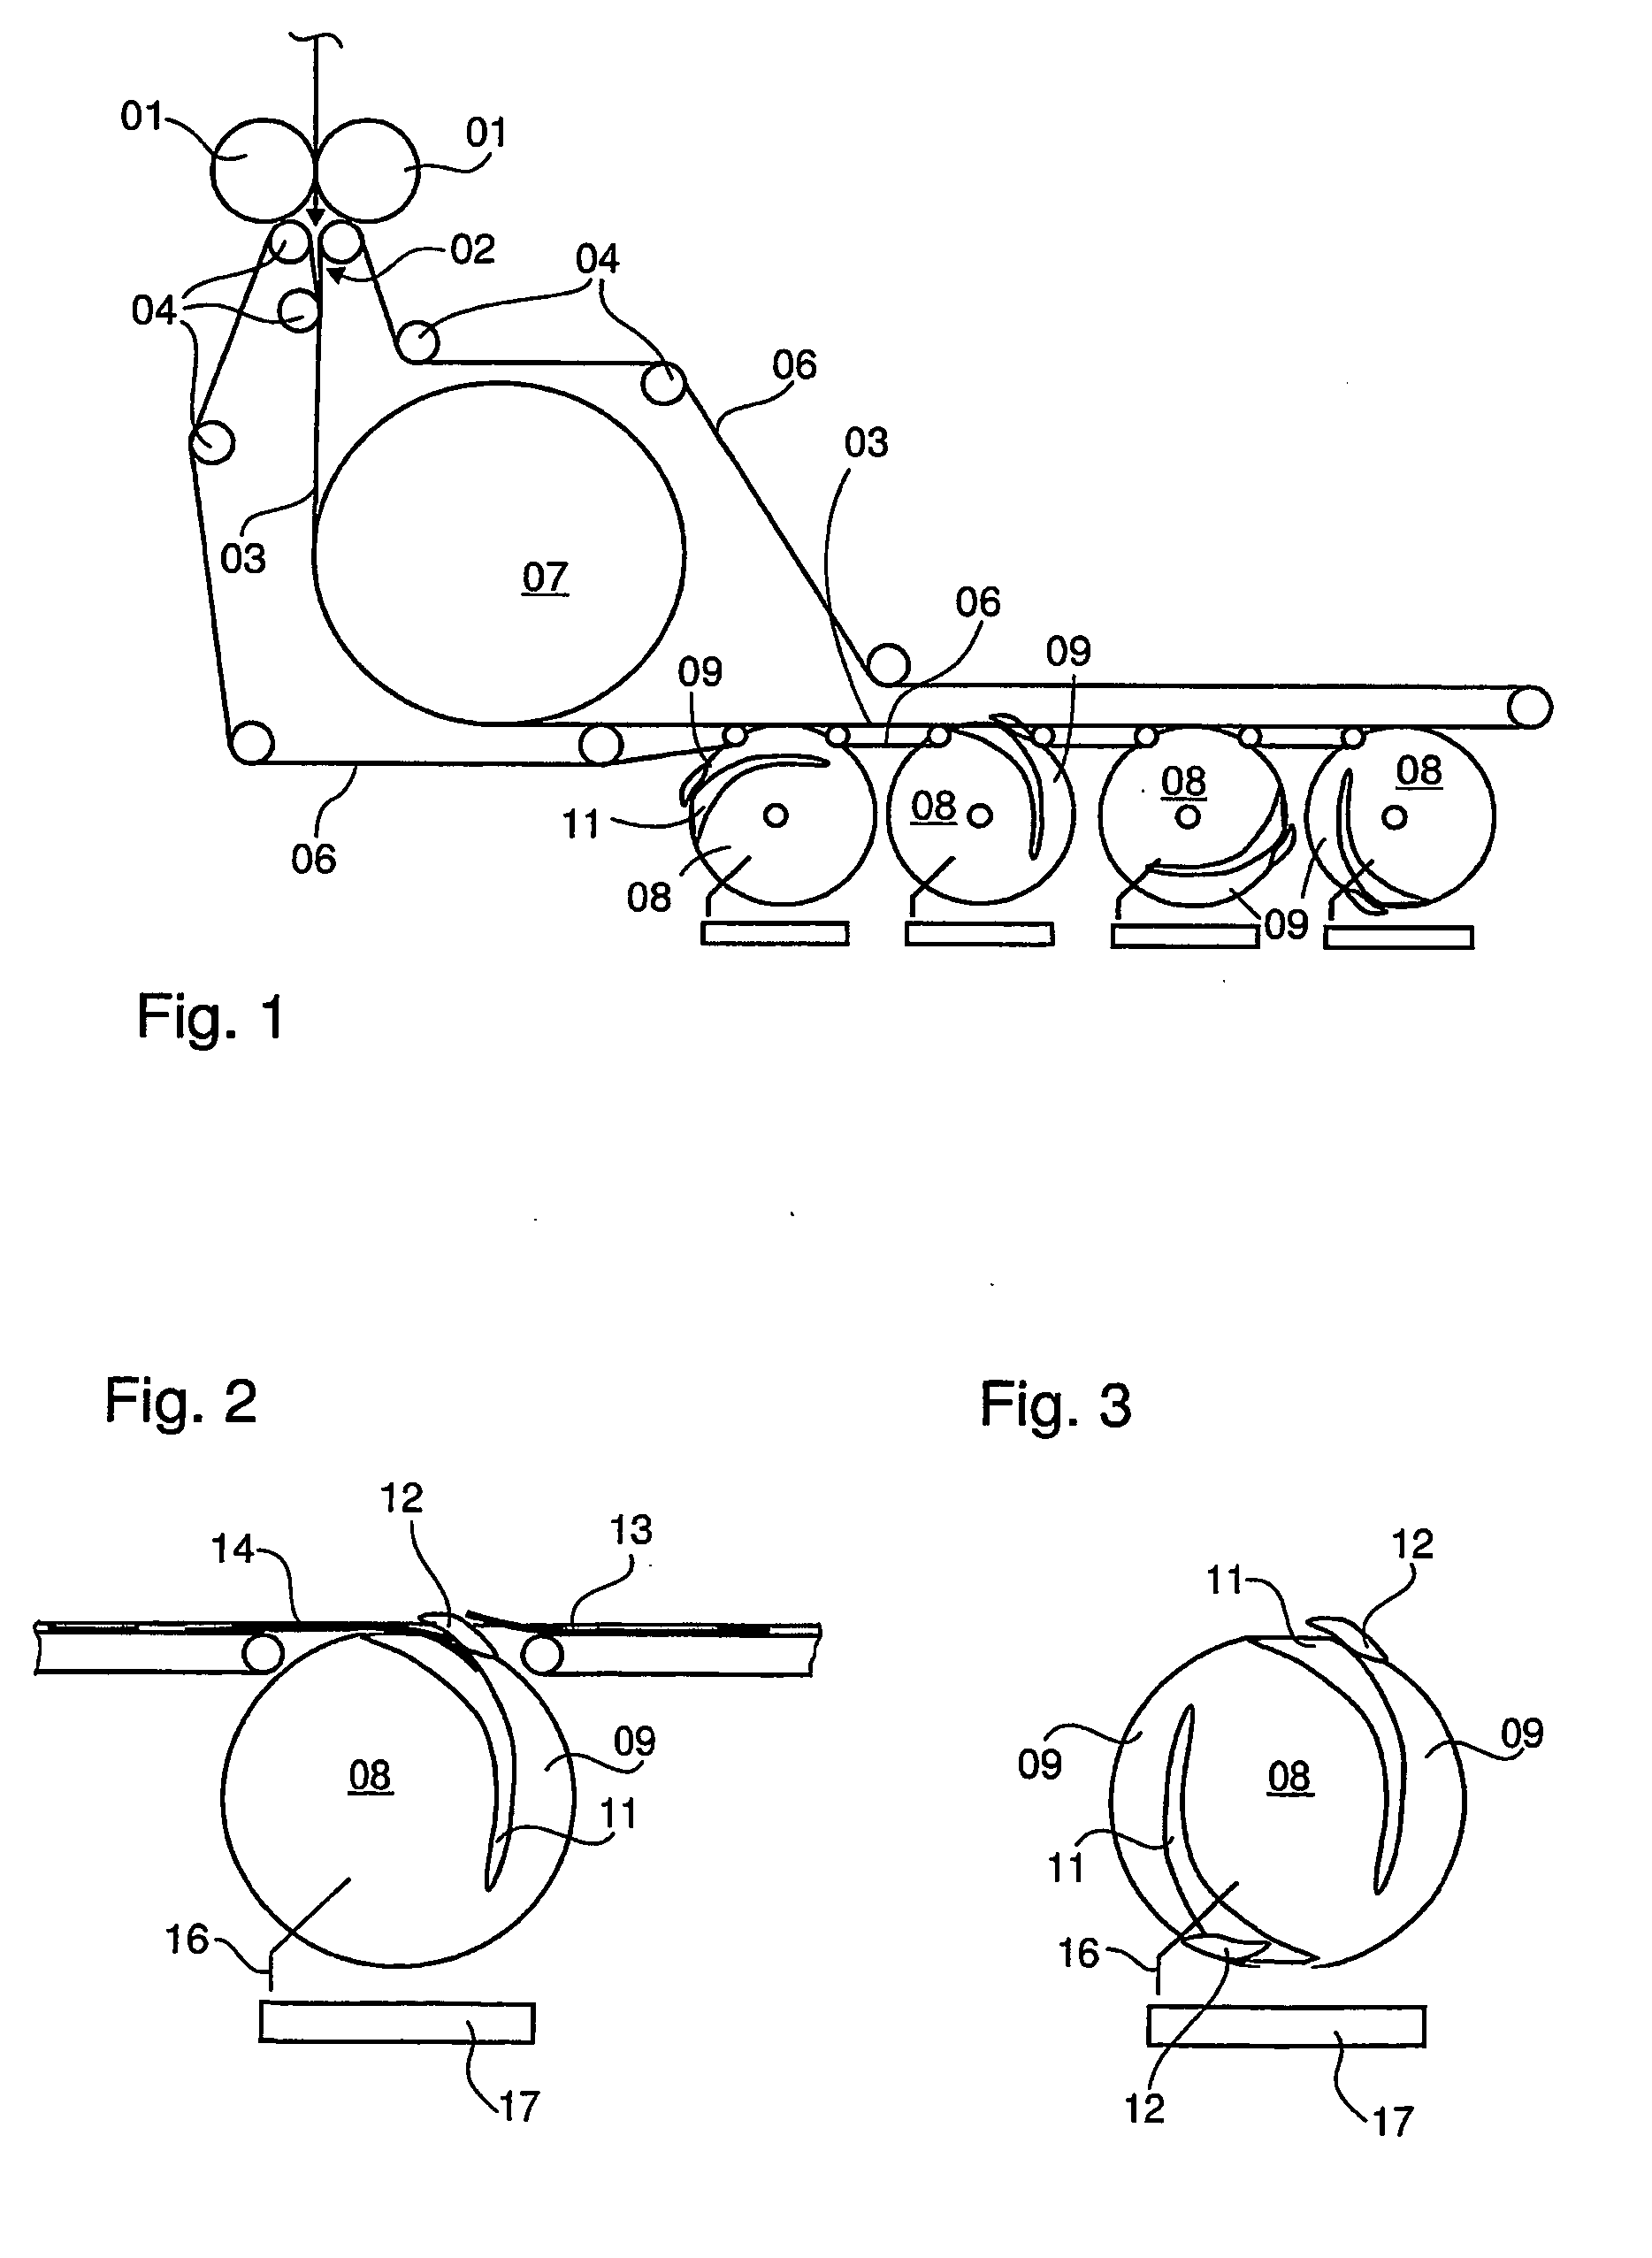 Device for distributing flat articles using a transport system